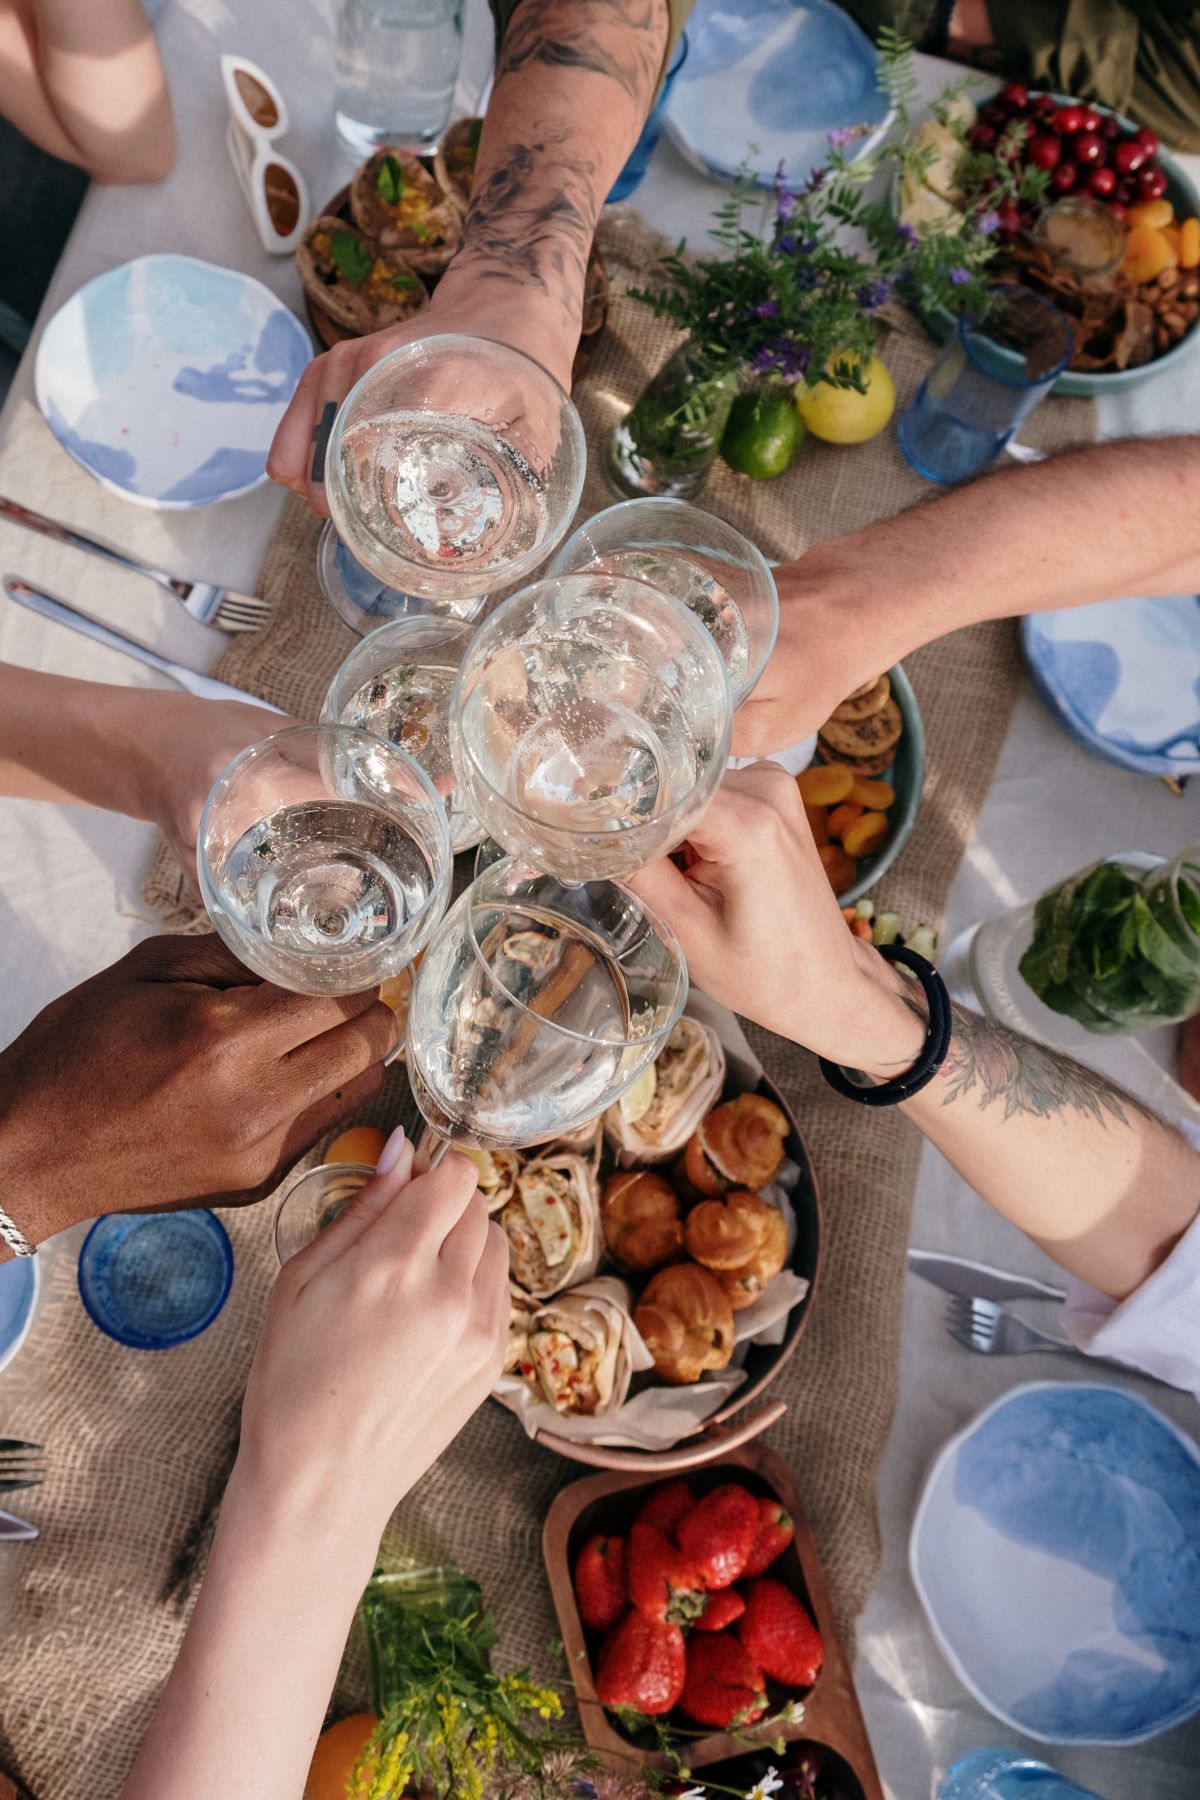 People cheering with clear glasses over table with food